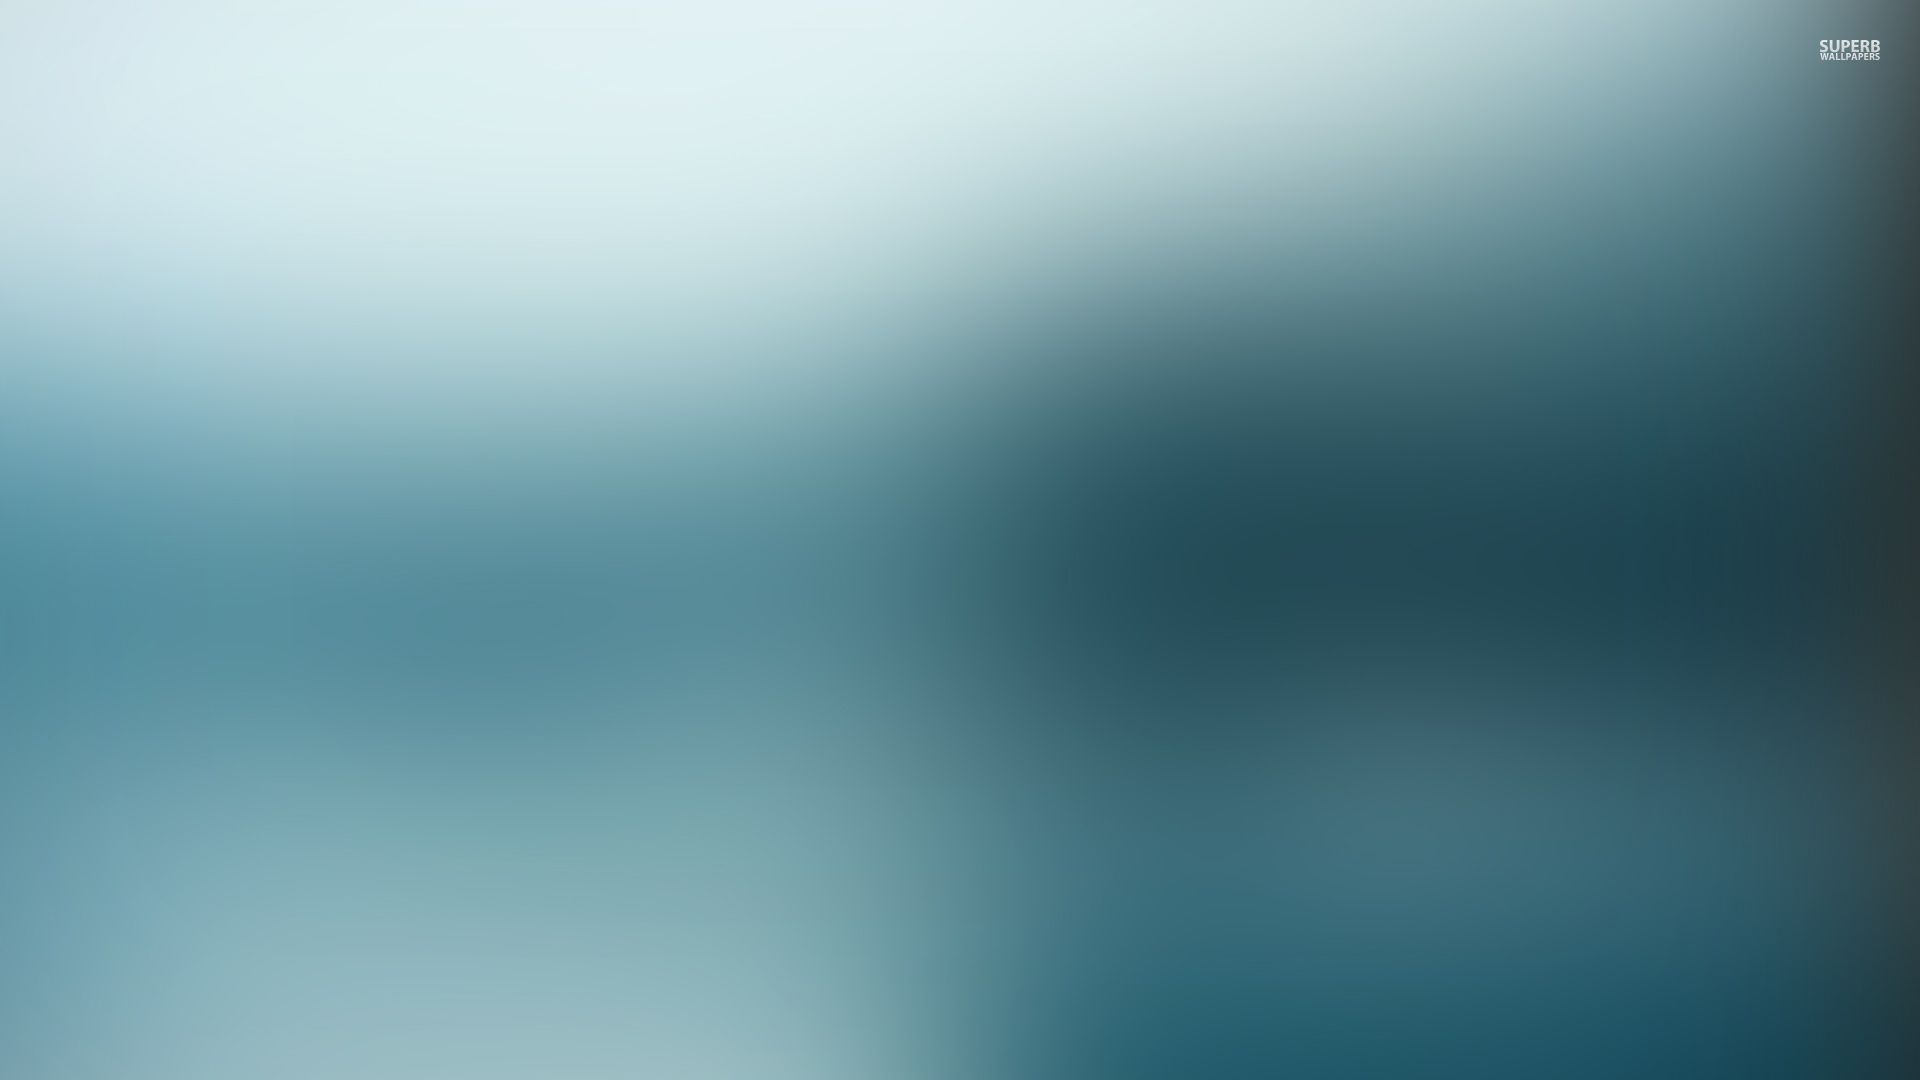 Turquoise Blur Wallpaper - Blurred Blue Grey Background , HD Wallpaper & Backgrounds